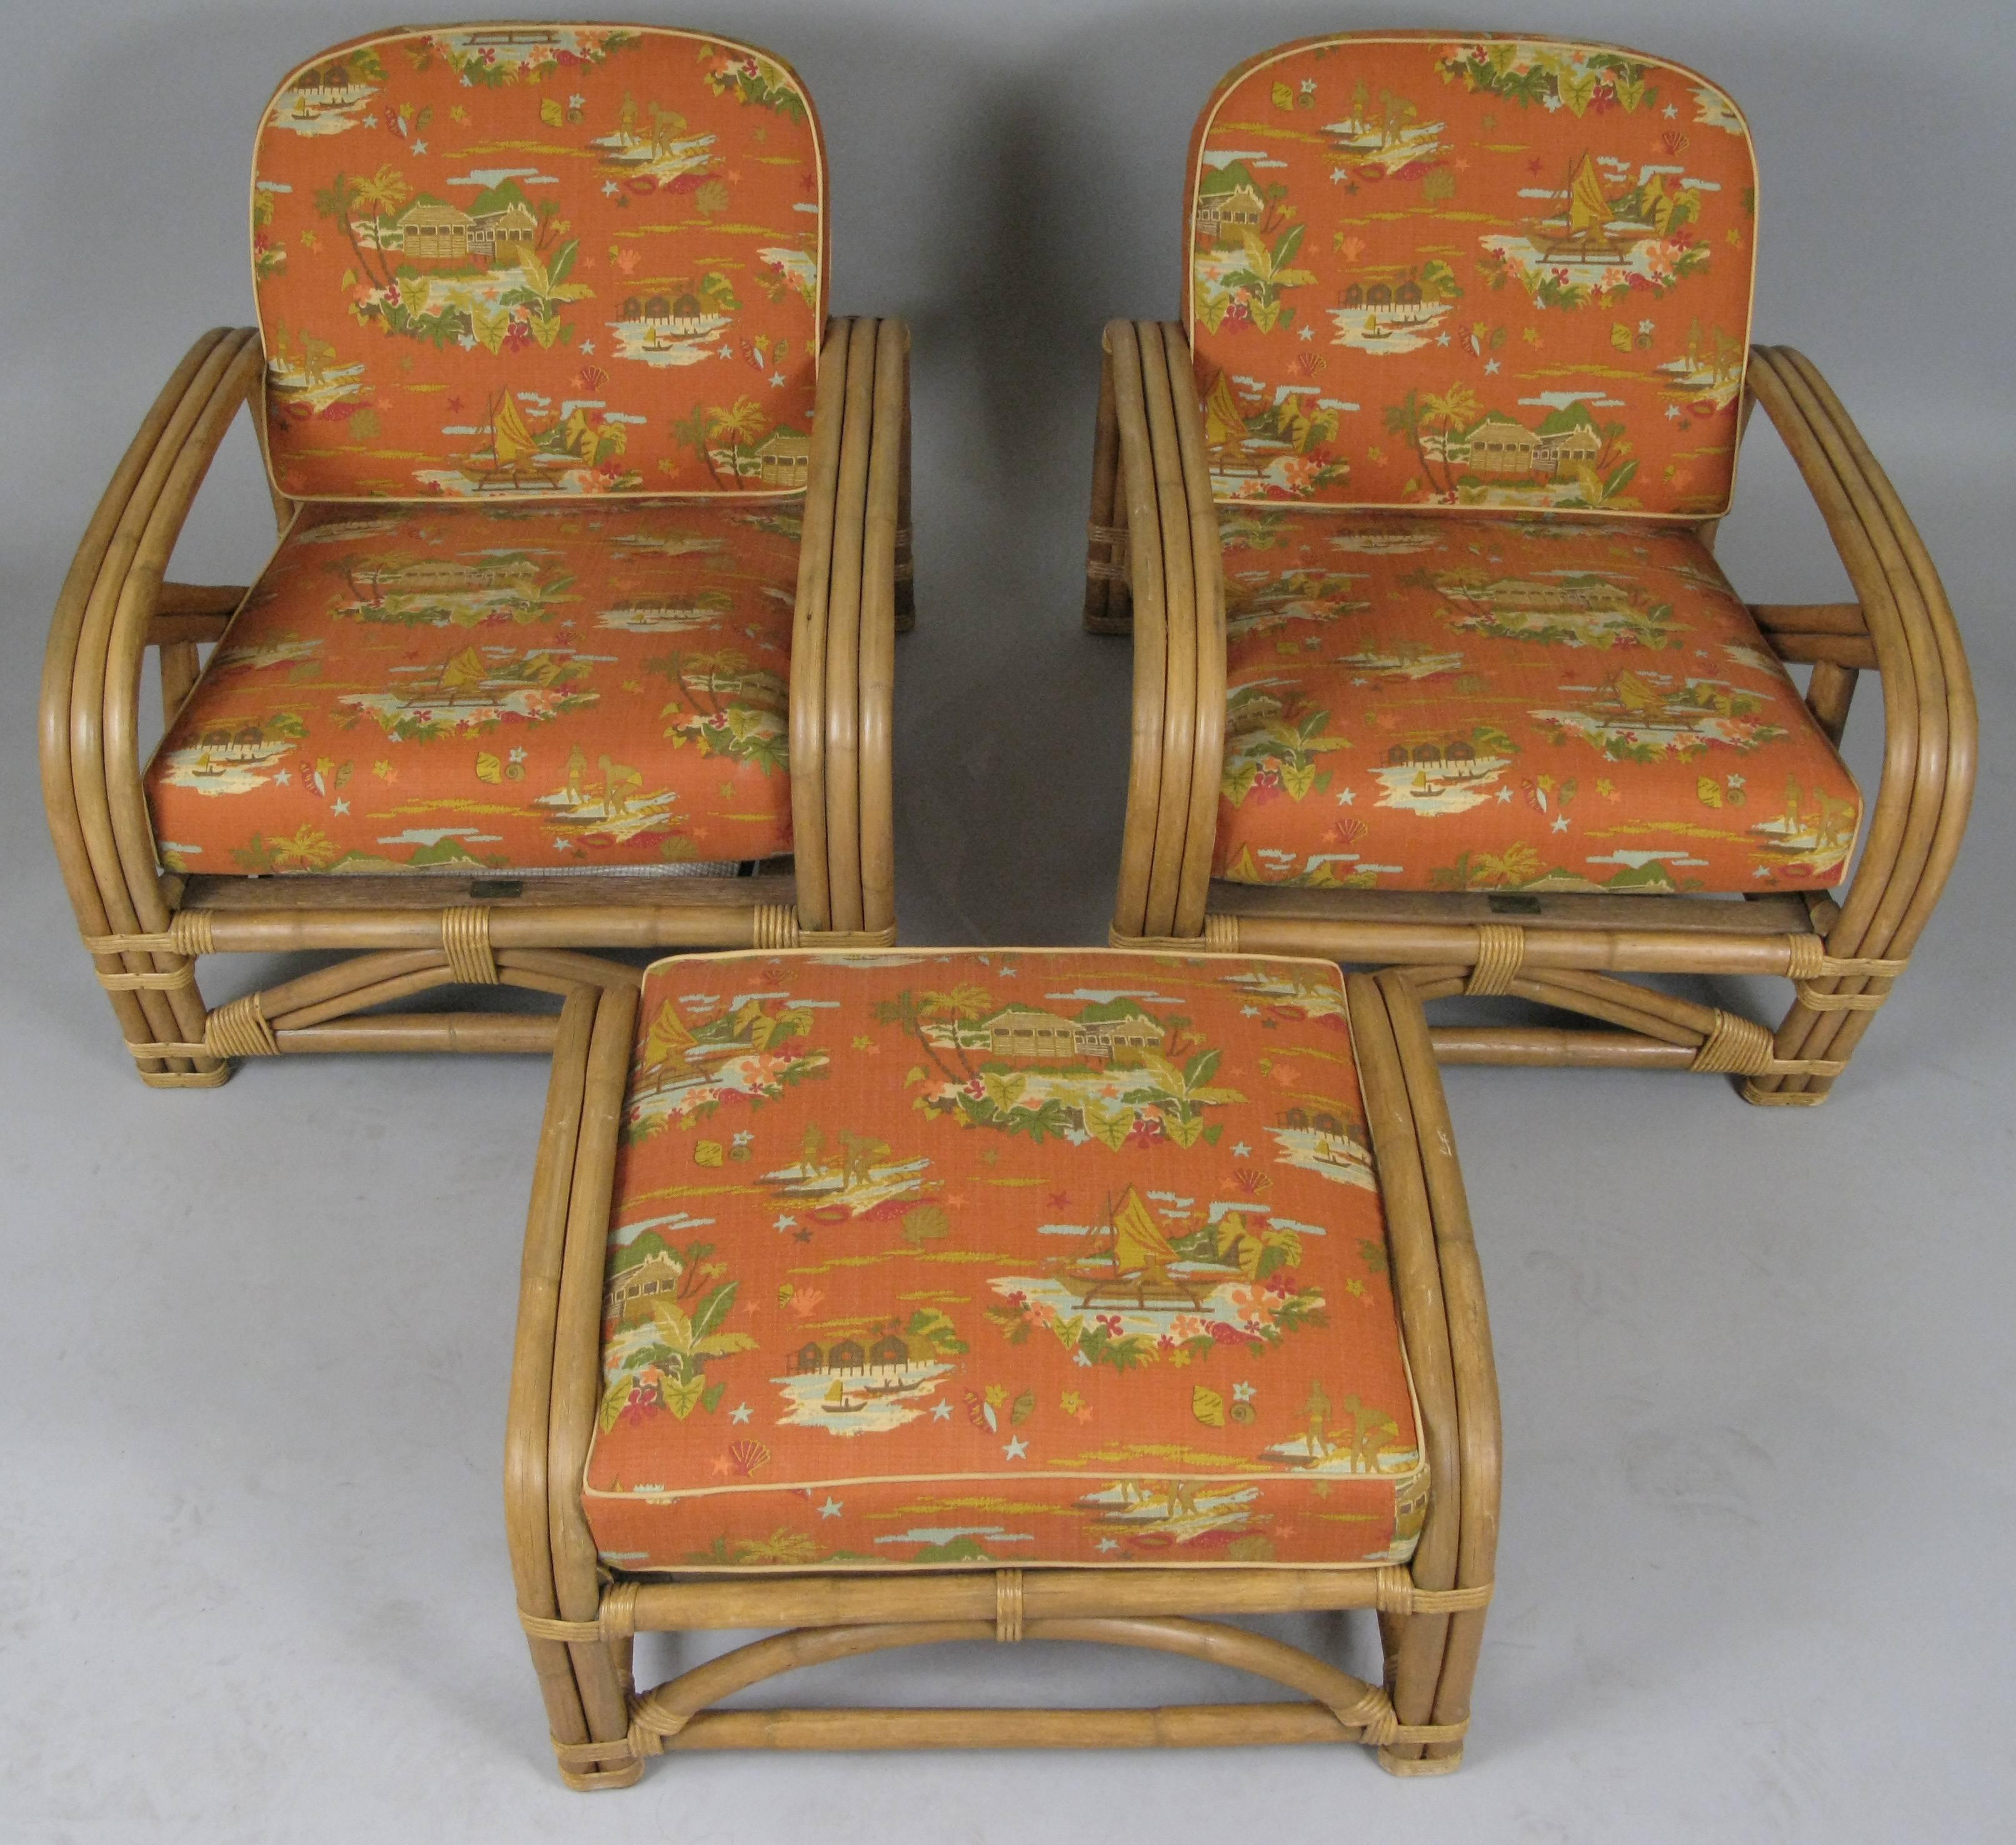 A set of Classic 1950s rattan lounge chairs with a matching ottoman by Ritts Company, complete with the original cushions covered in their original pictorial 1950s birchbark with an orange ground and tropical scenes of surfers and sailors. Very good